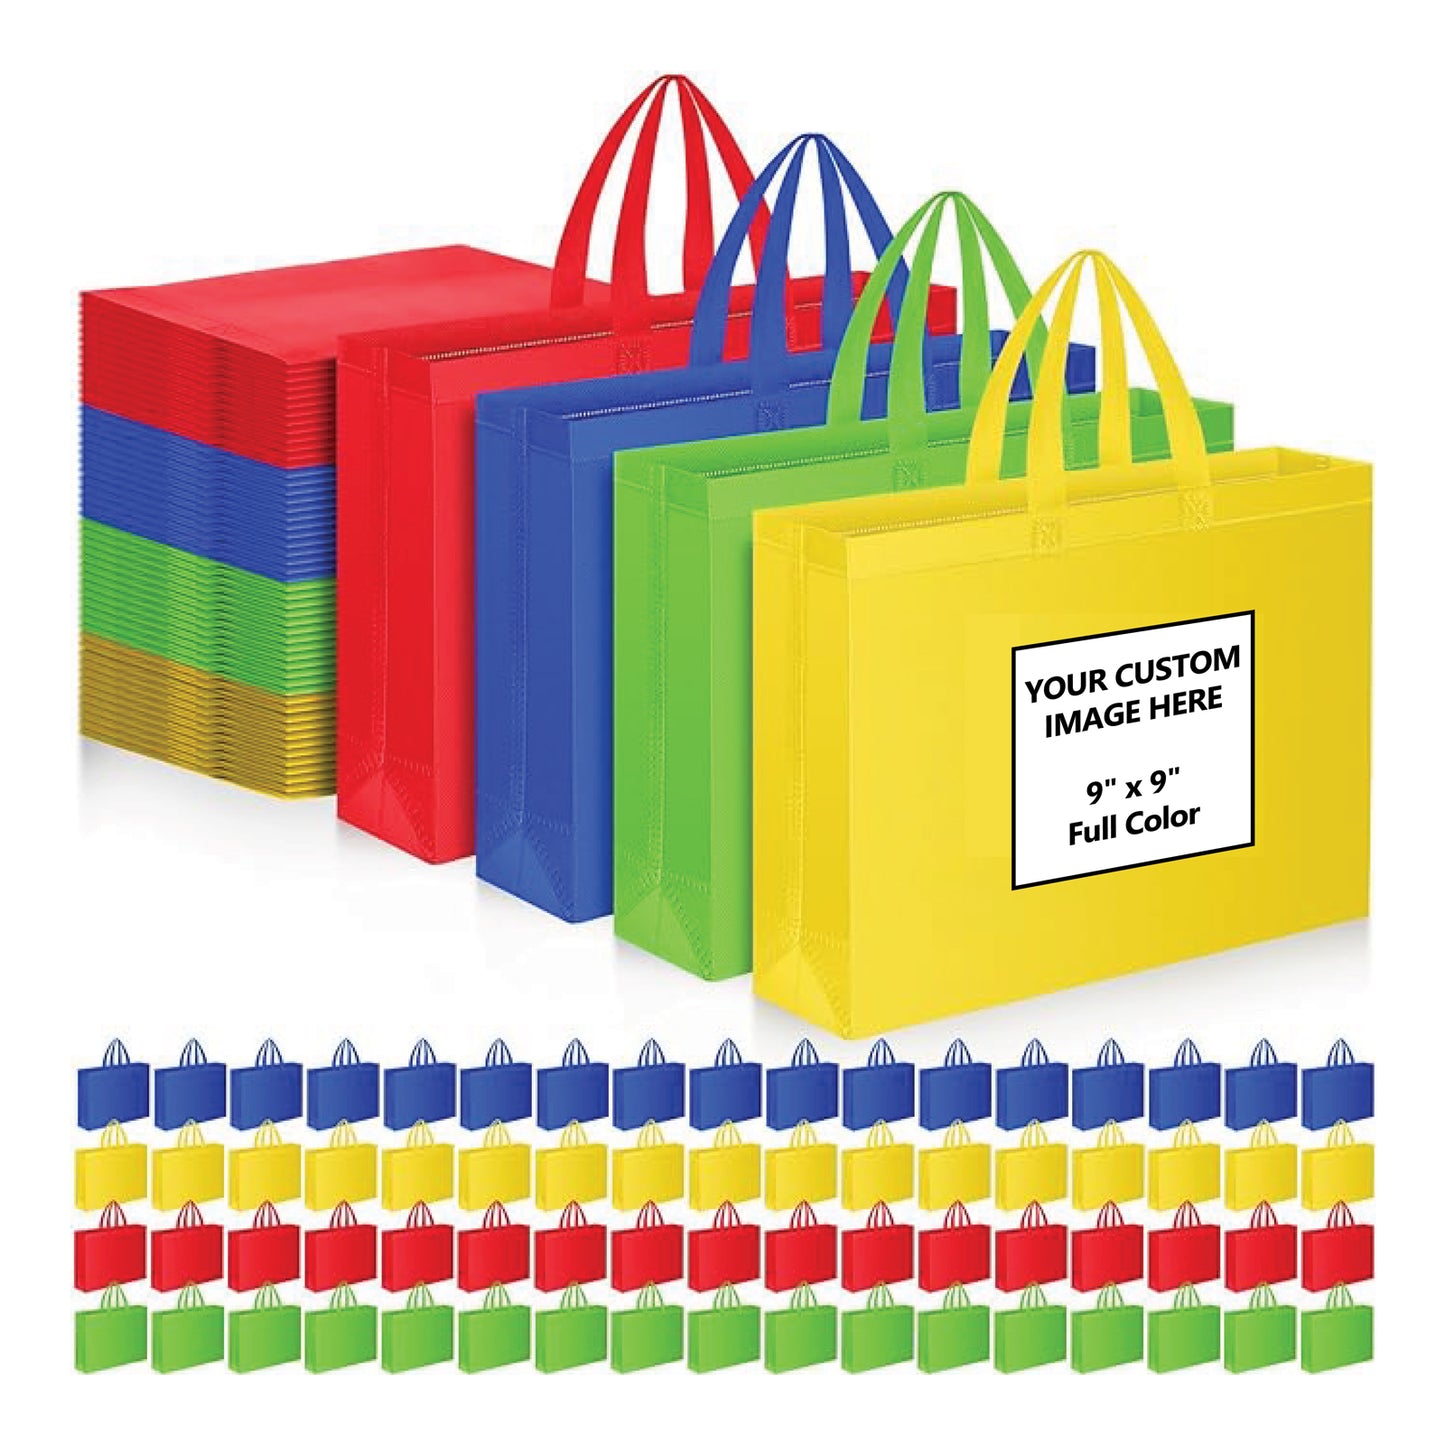 Grocery bags - Full Color